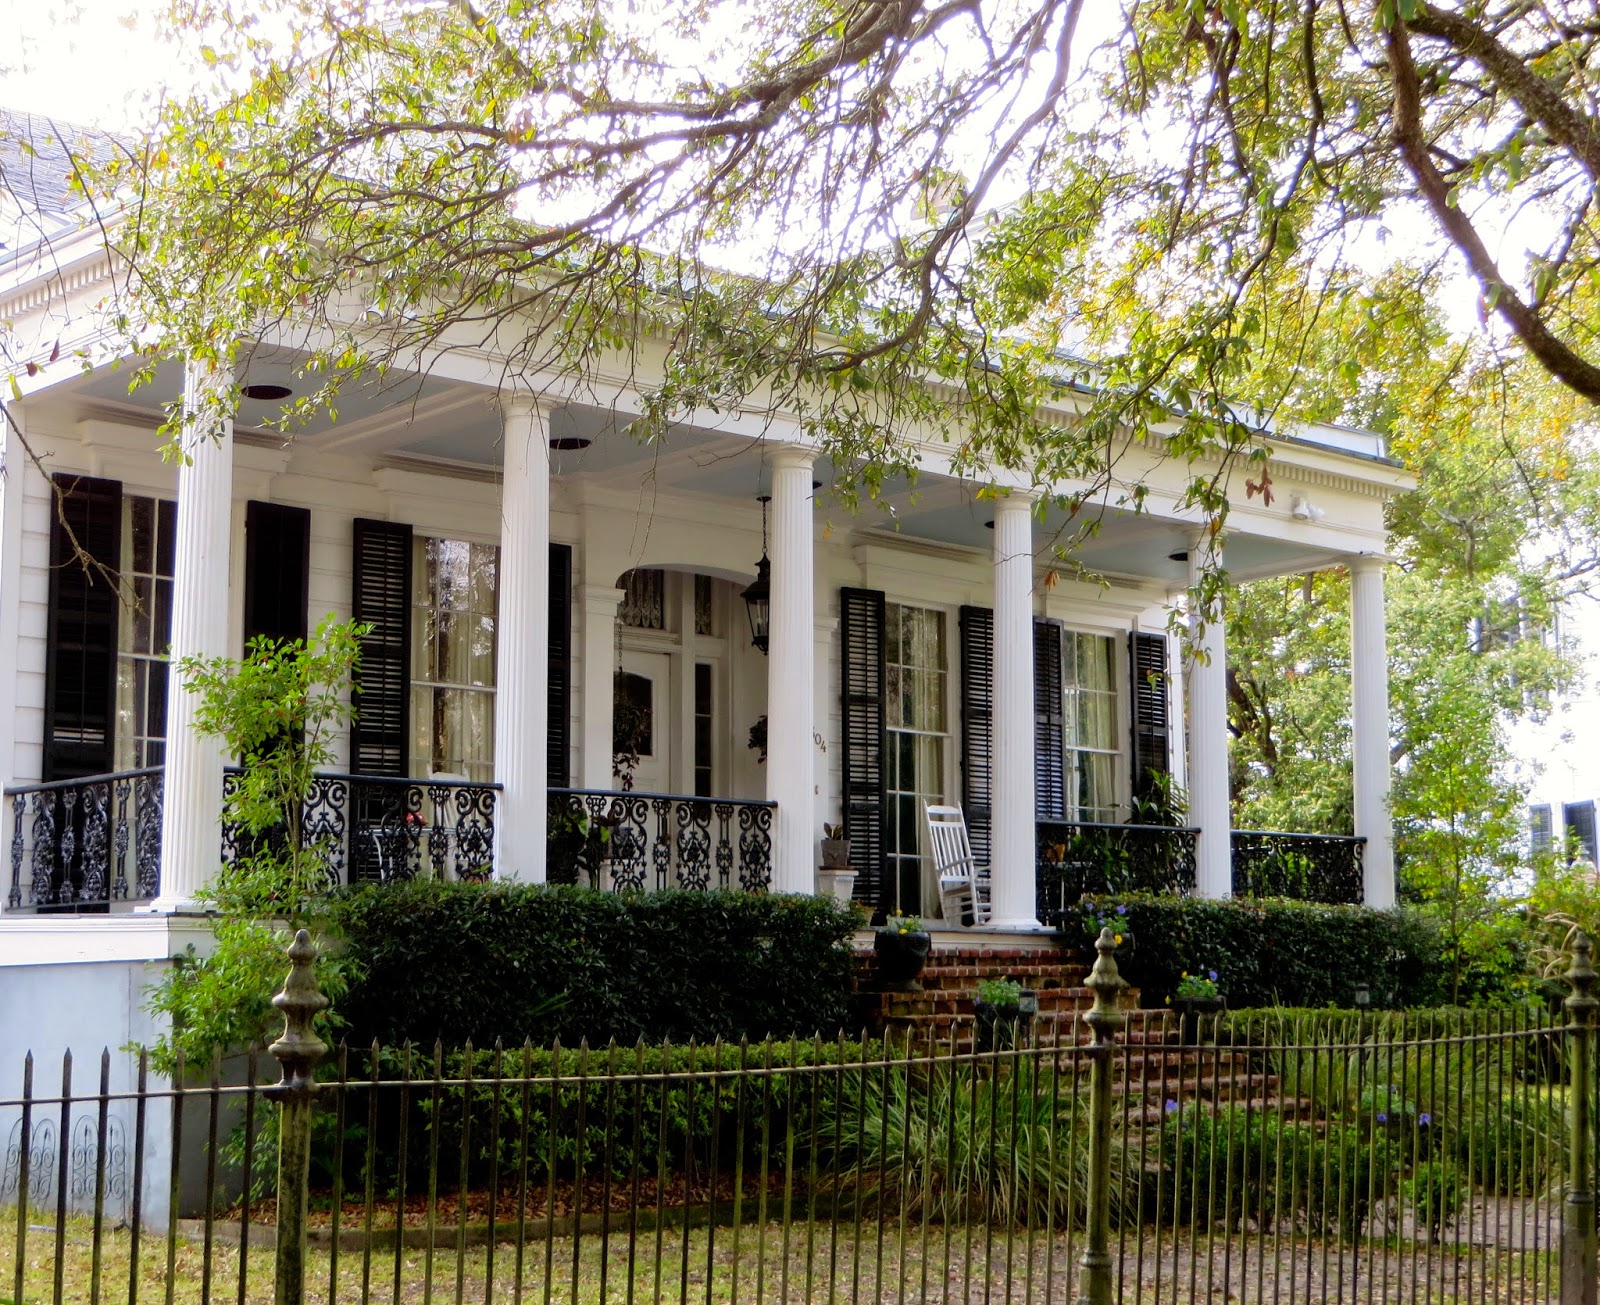 a curious gardener: New Orleans Garden District and Uptown